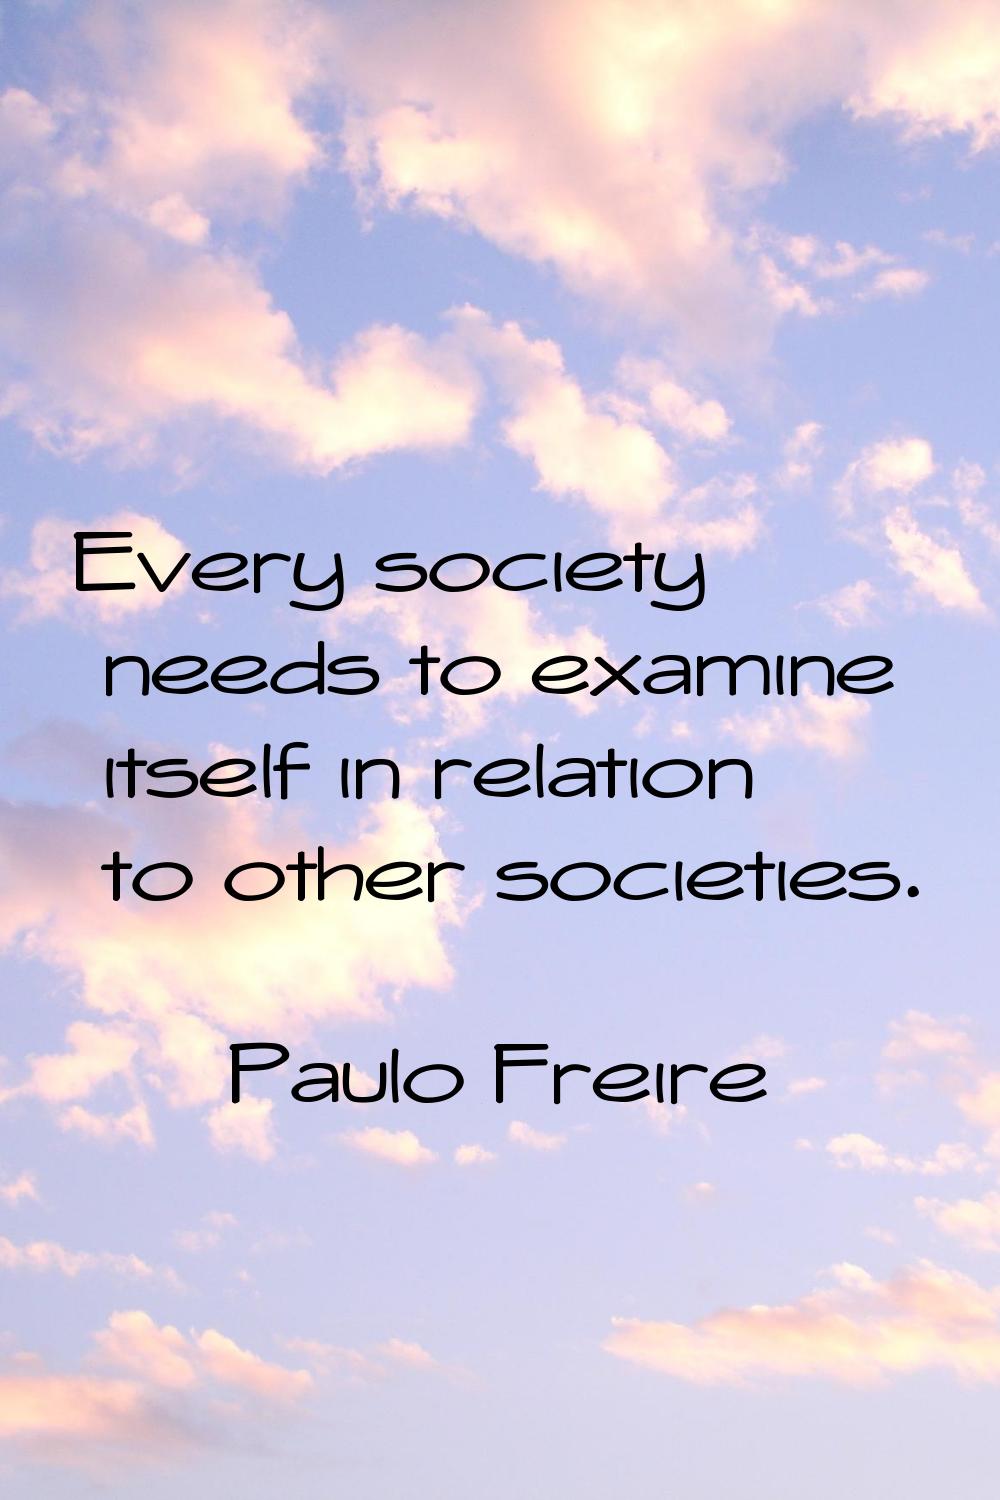 Every society needs to examine itself in relation to other societies.